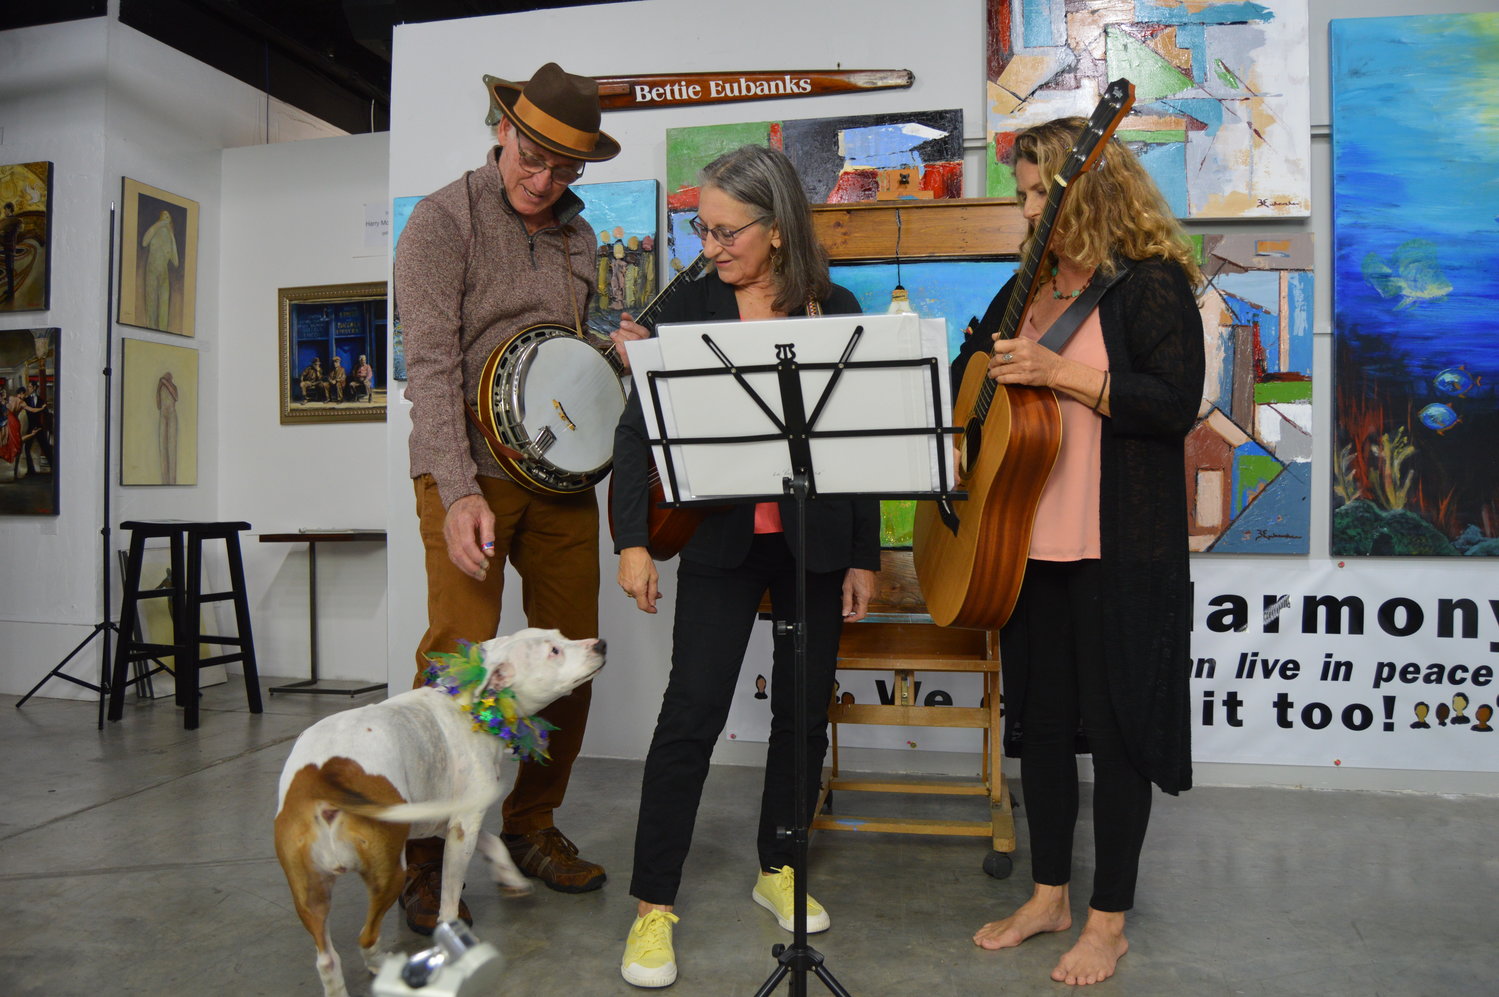 The band Skin & Bonz turned a poem by Chris Bodor into a song and performed it in a video featuring "Molly," the inspiration for smiling dog in the corresponding painting by Laura O'Neal.